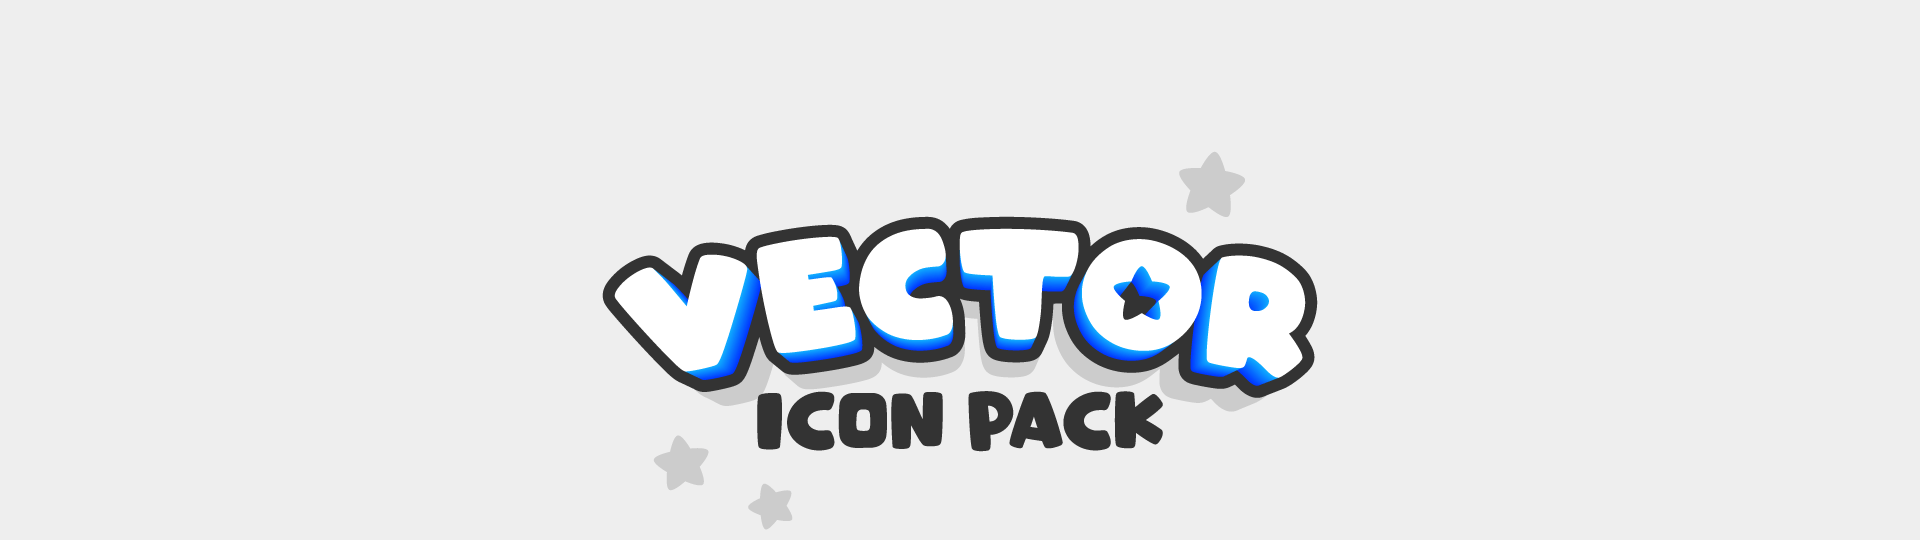 Rhos on X: ⚠⚠ MORE beautiful icons for the next icon pack update  releasing tomorrow 👀 get it now before the price goes up!   #roblox #robloxdev #robloxui #robloxart   / X